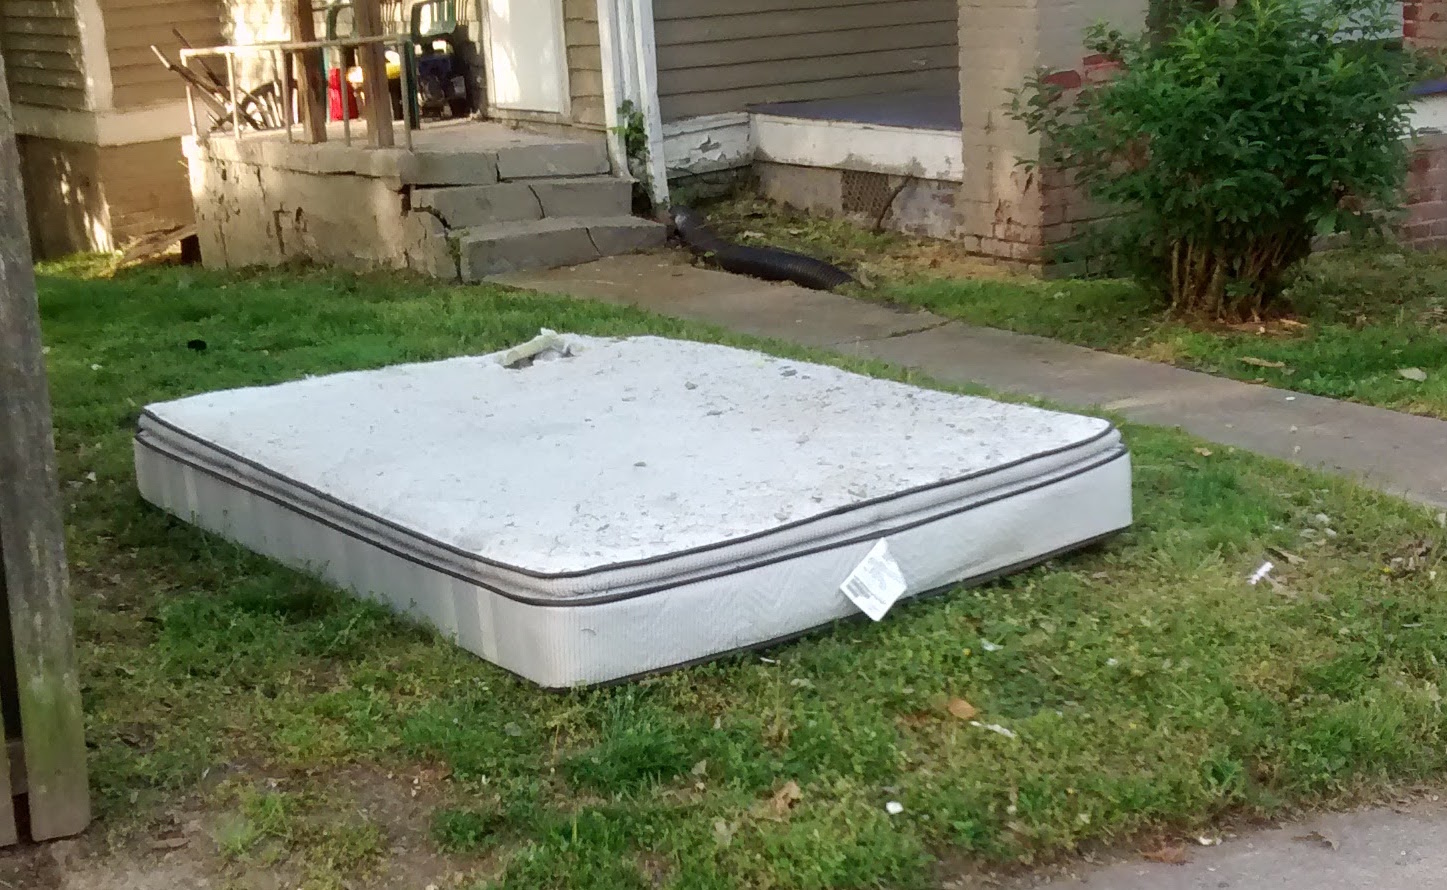 mattress in yard, thrown away by some thoughtless person